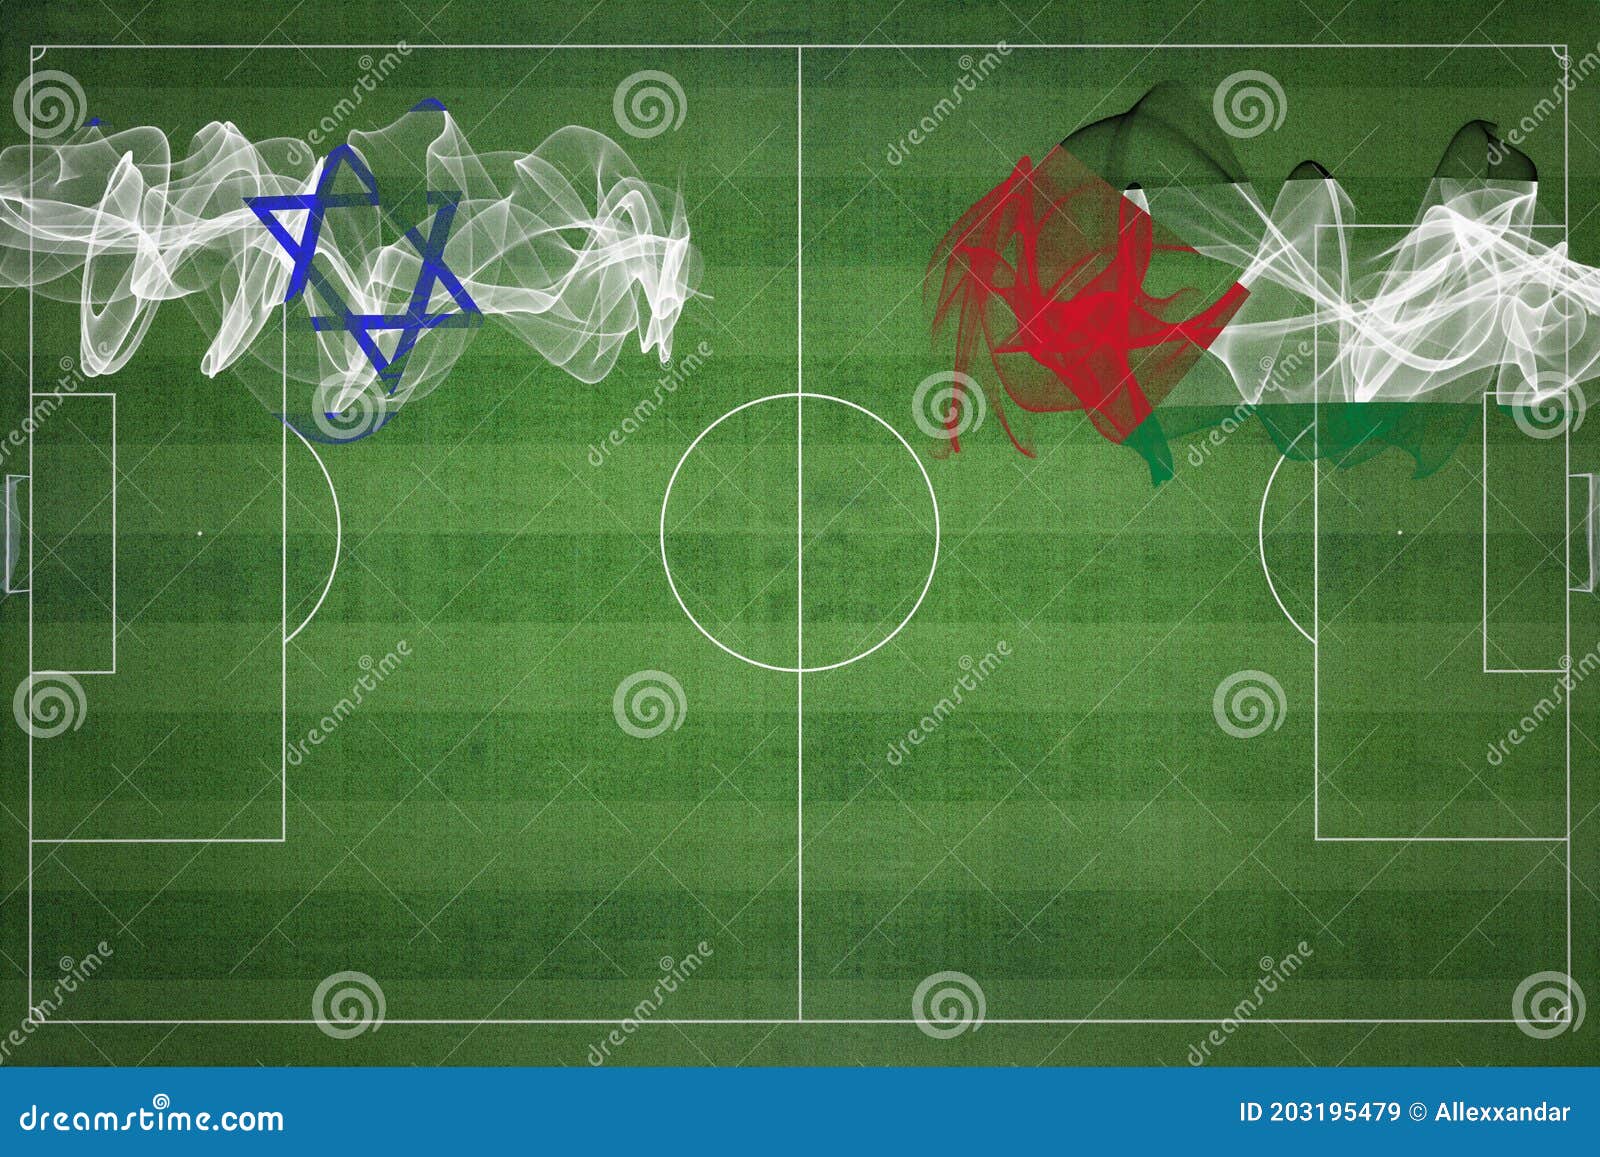 Israel Vs Palestine Soccer Match, National Colors, National Flags